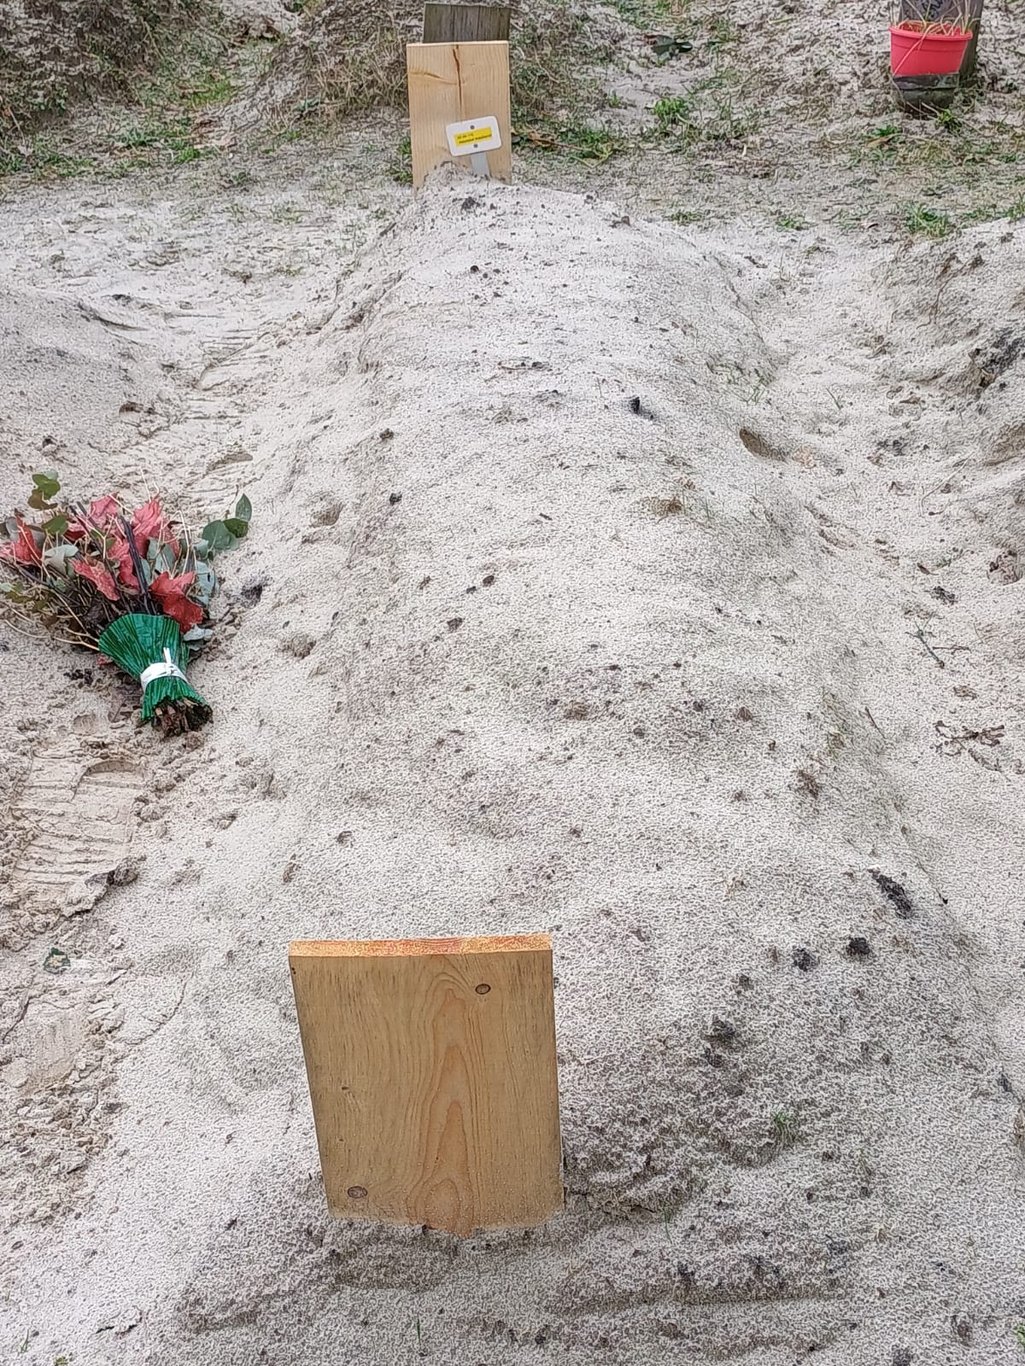 A sandy grave with a board for a tombstone and flowers to the left